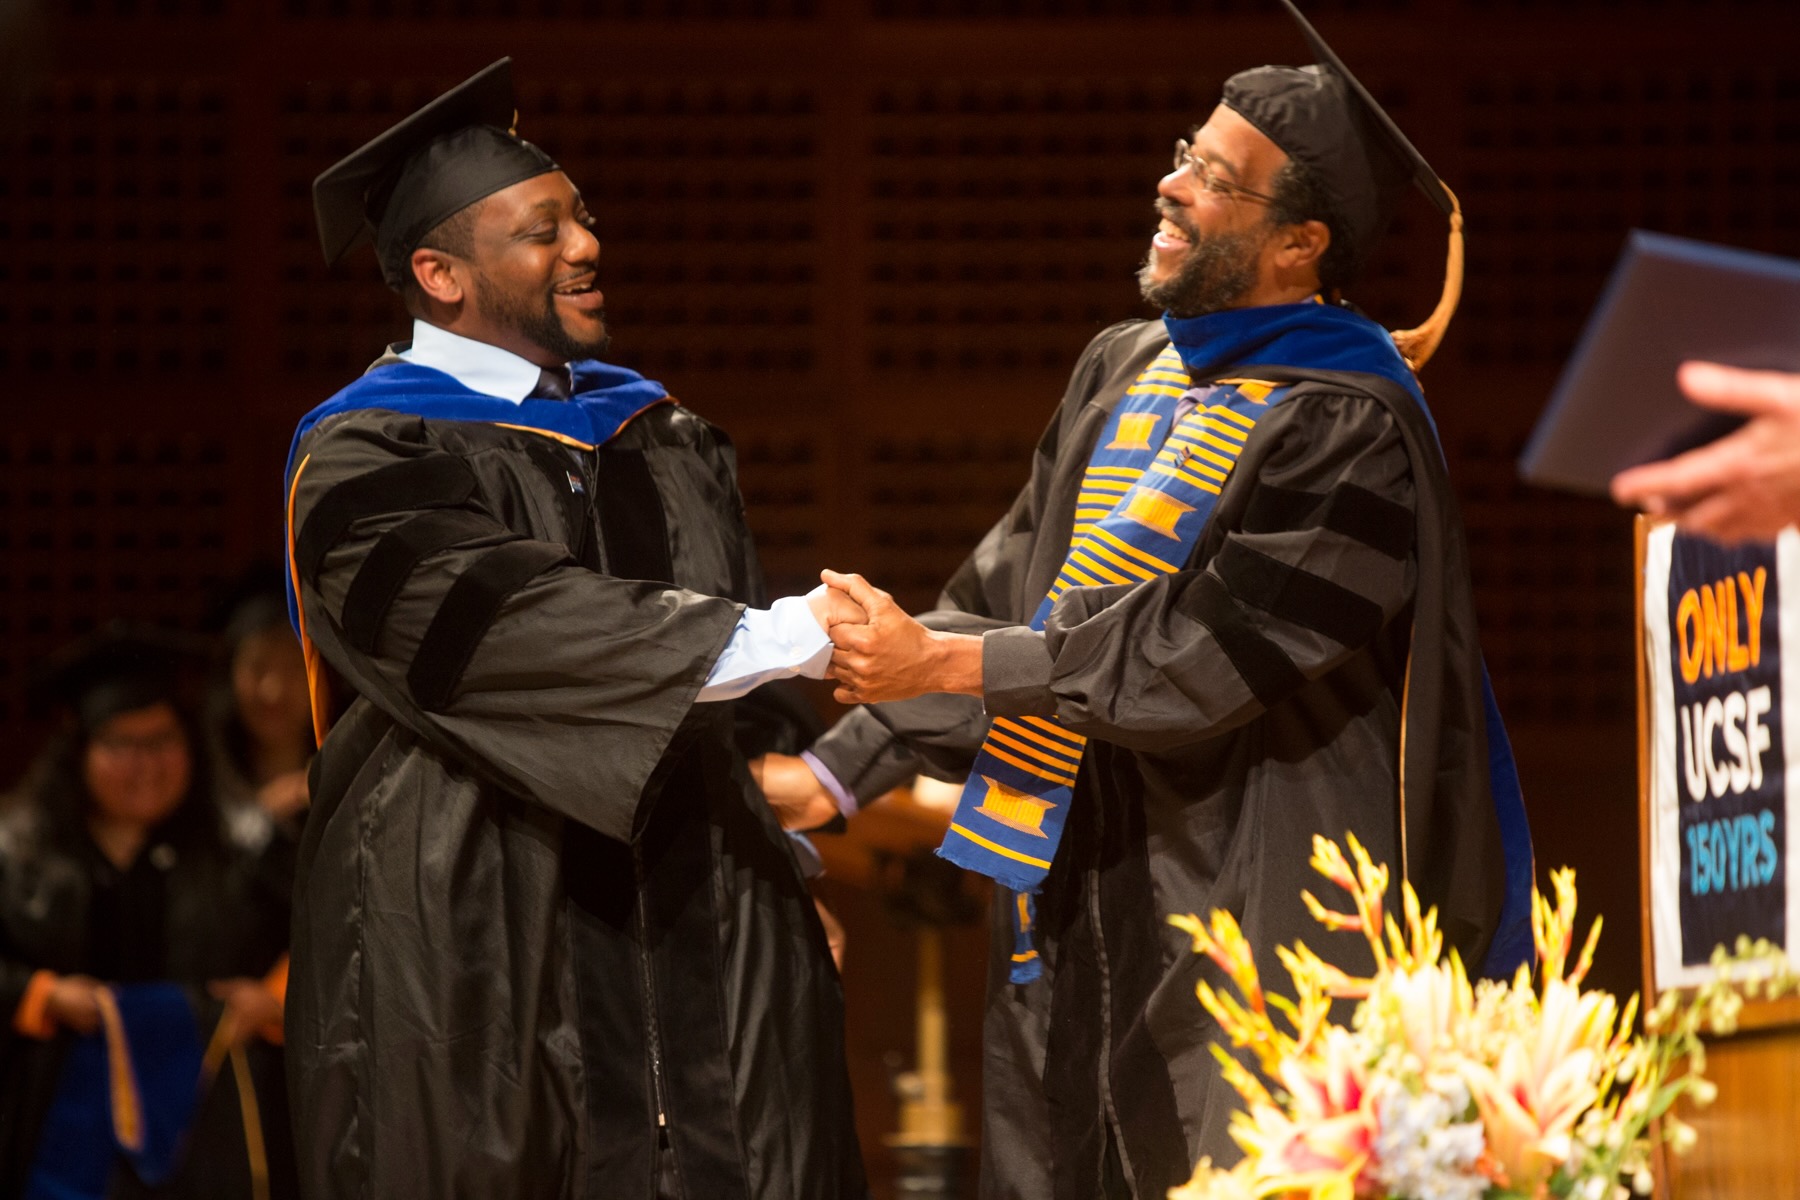 Rollins and Pinderhughes at the 2014 UCSF School of Nursing Commencement Ceremony